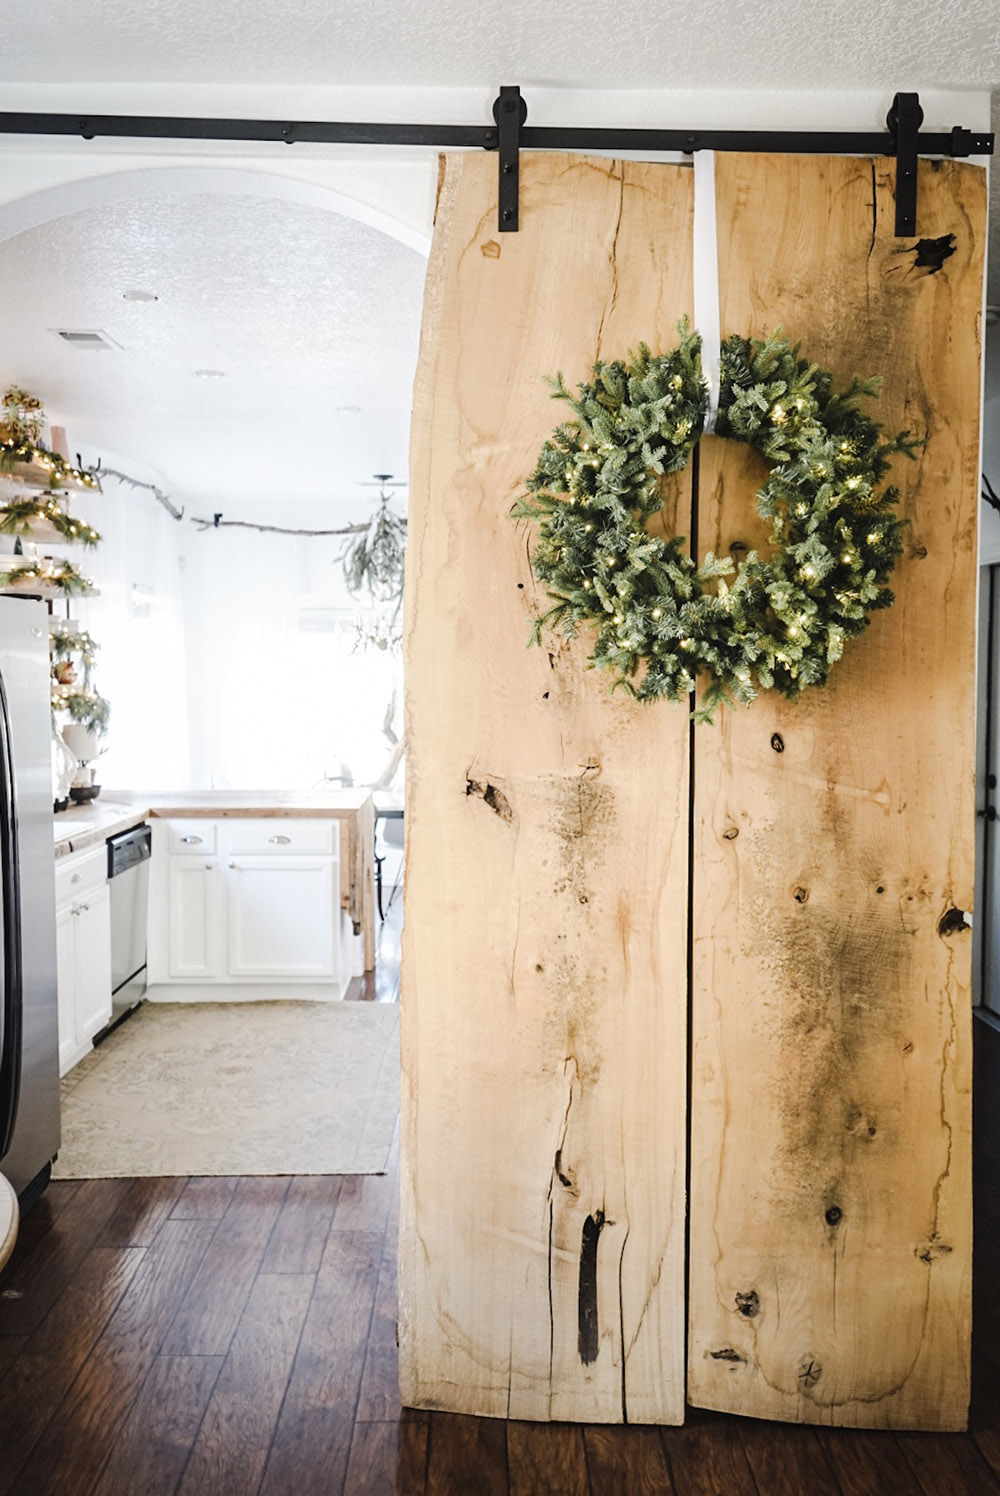 A wooden door on barndoor hardware is decorated with a wreath.